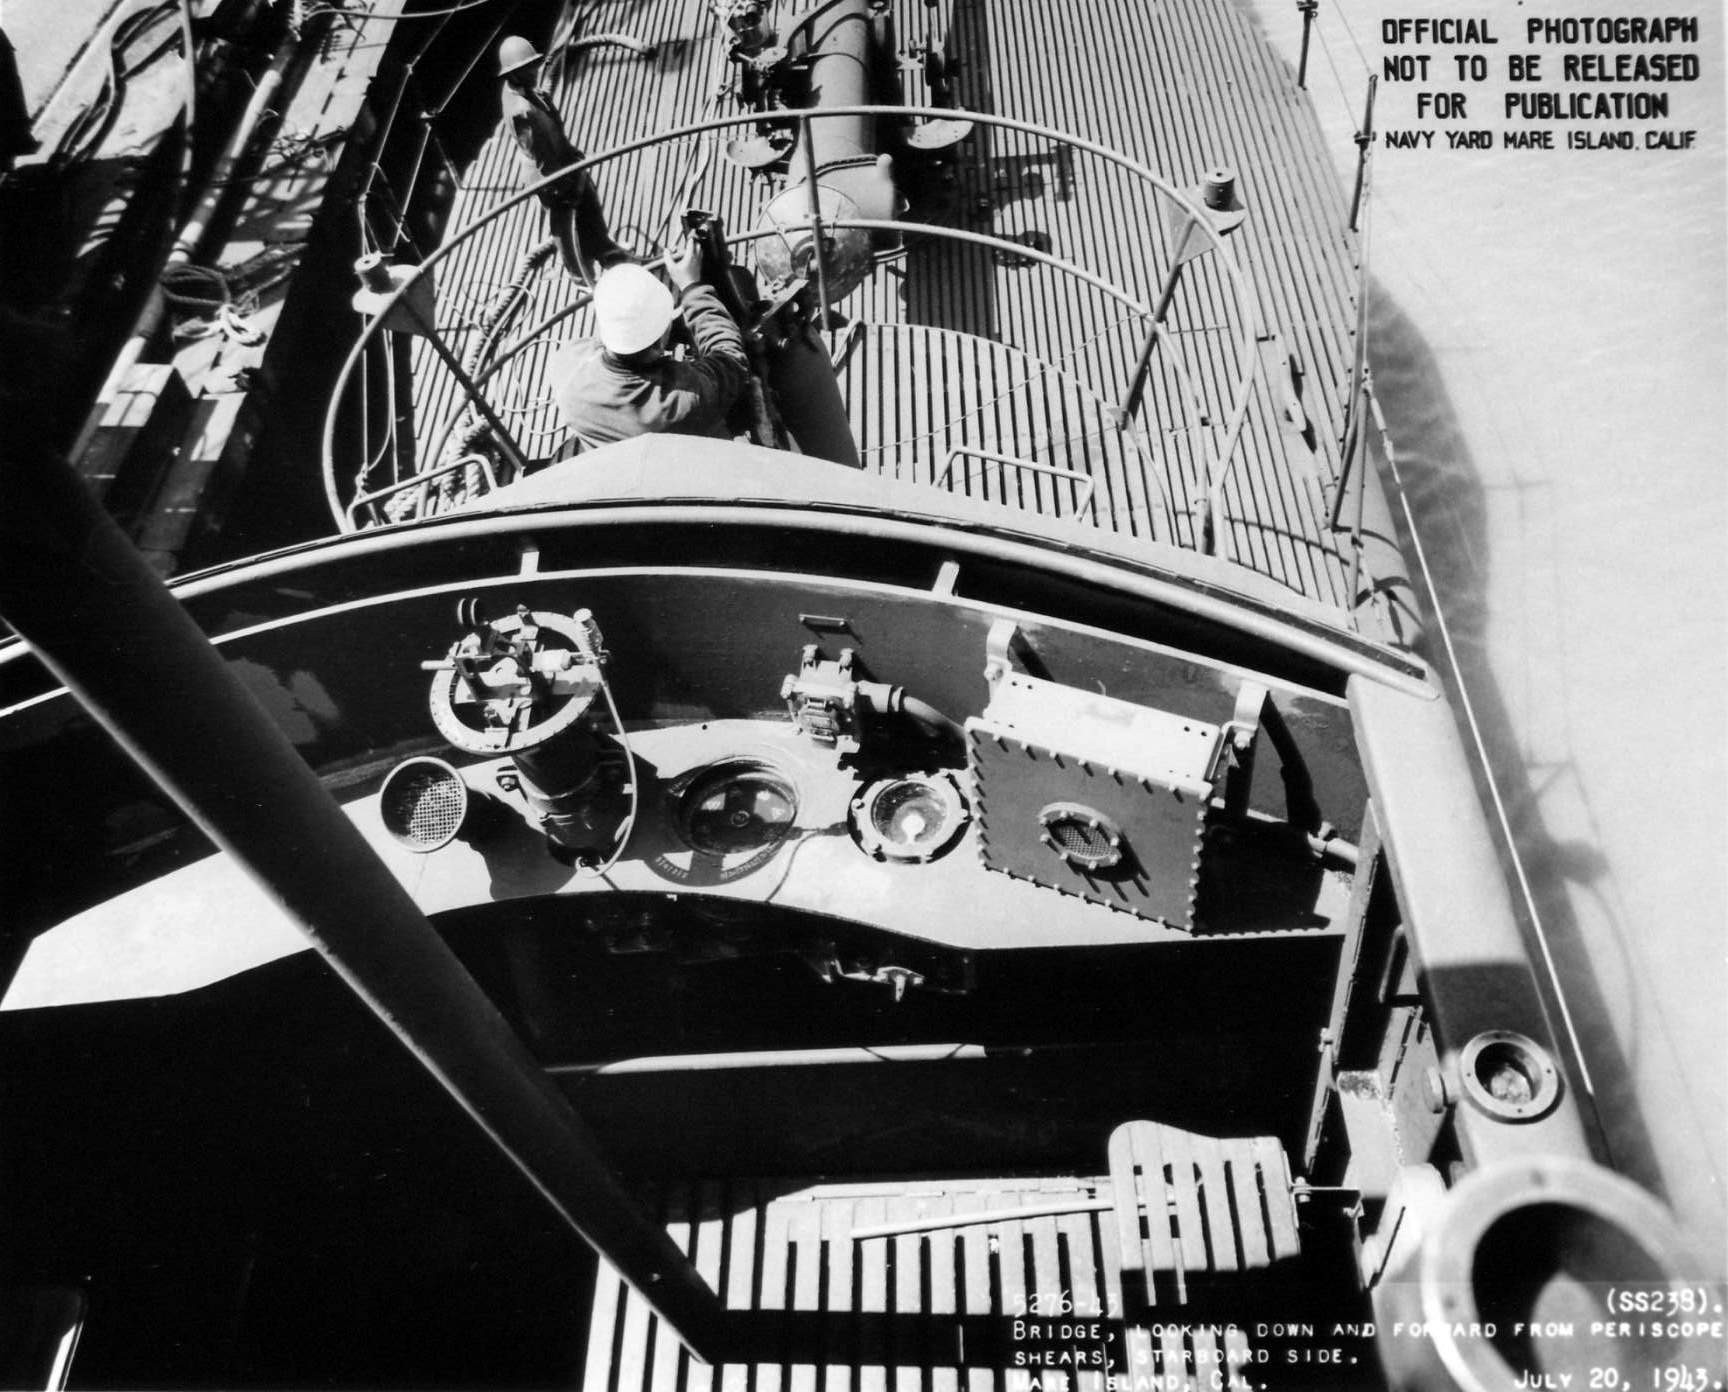 View of USS Wahoo's bridge from above while at Mare Island Navy Yard in Vallejo, California, United States, 20 Jul 1943, photo 1 of 2